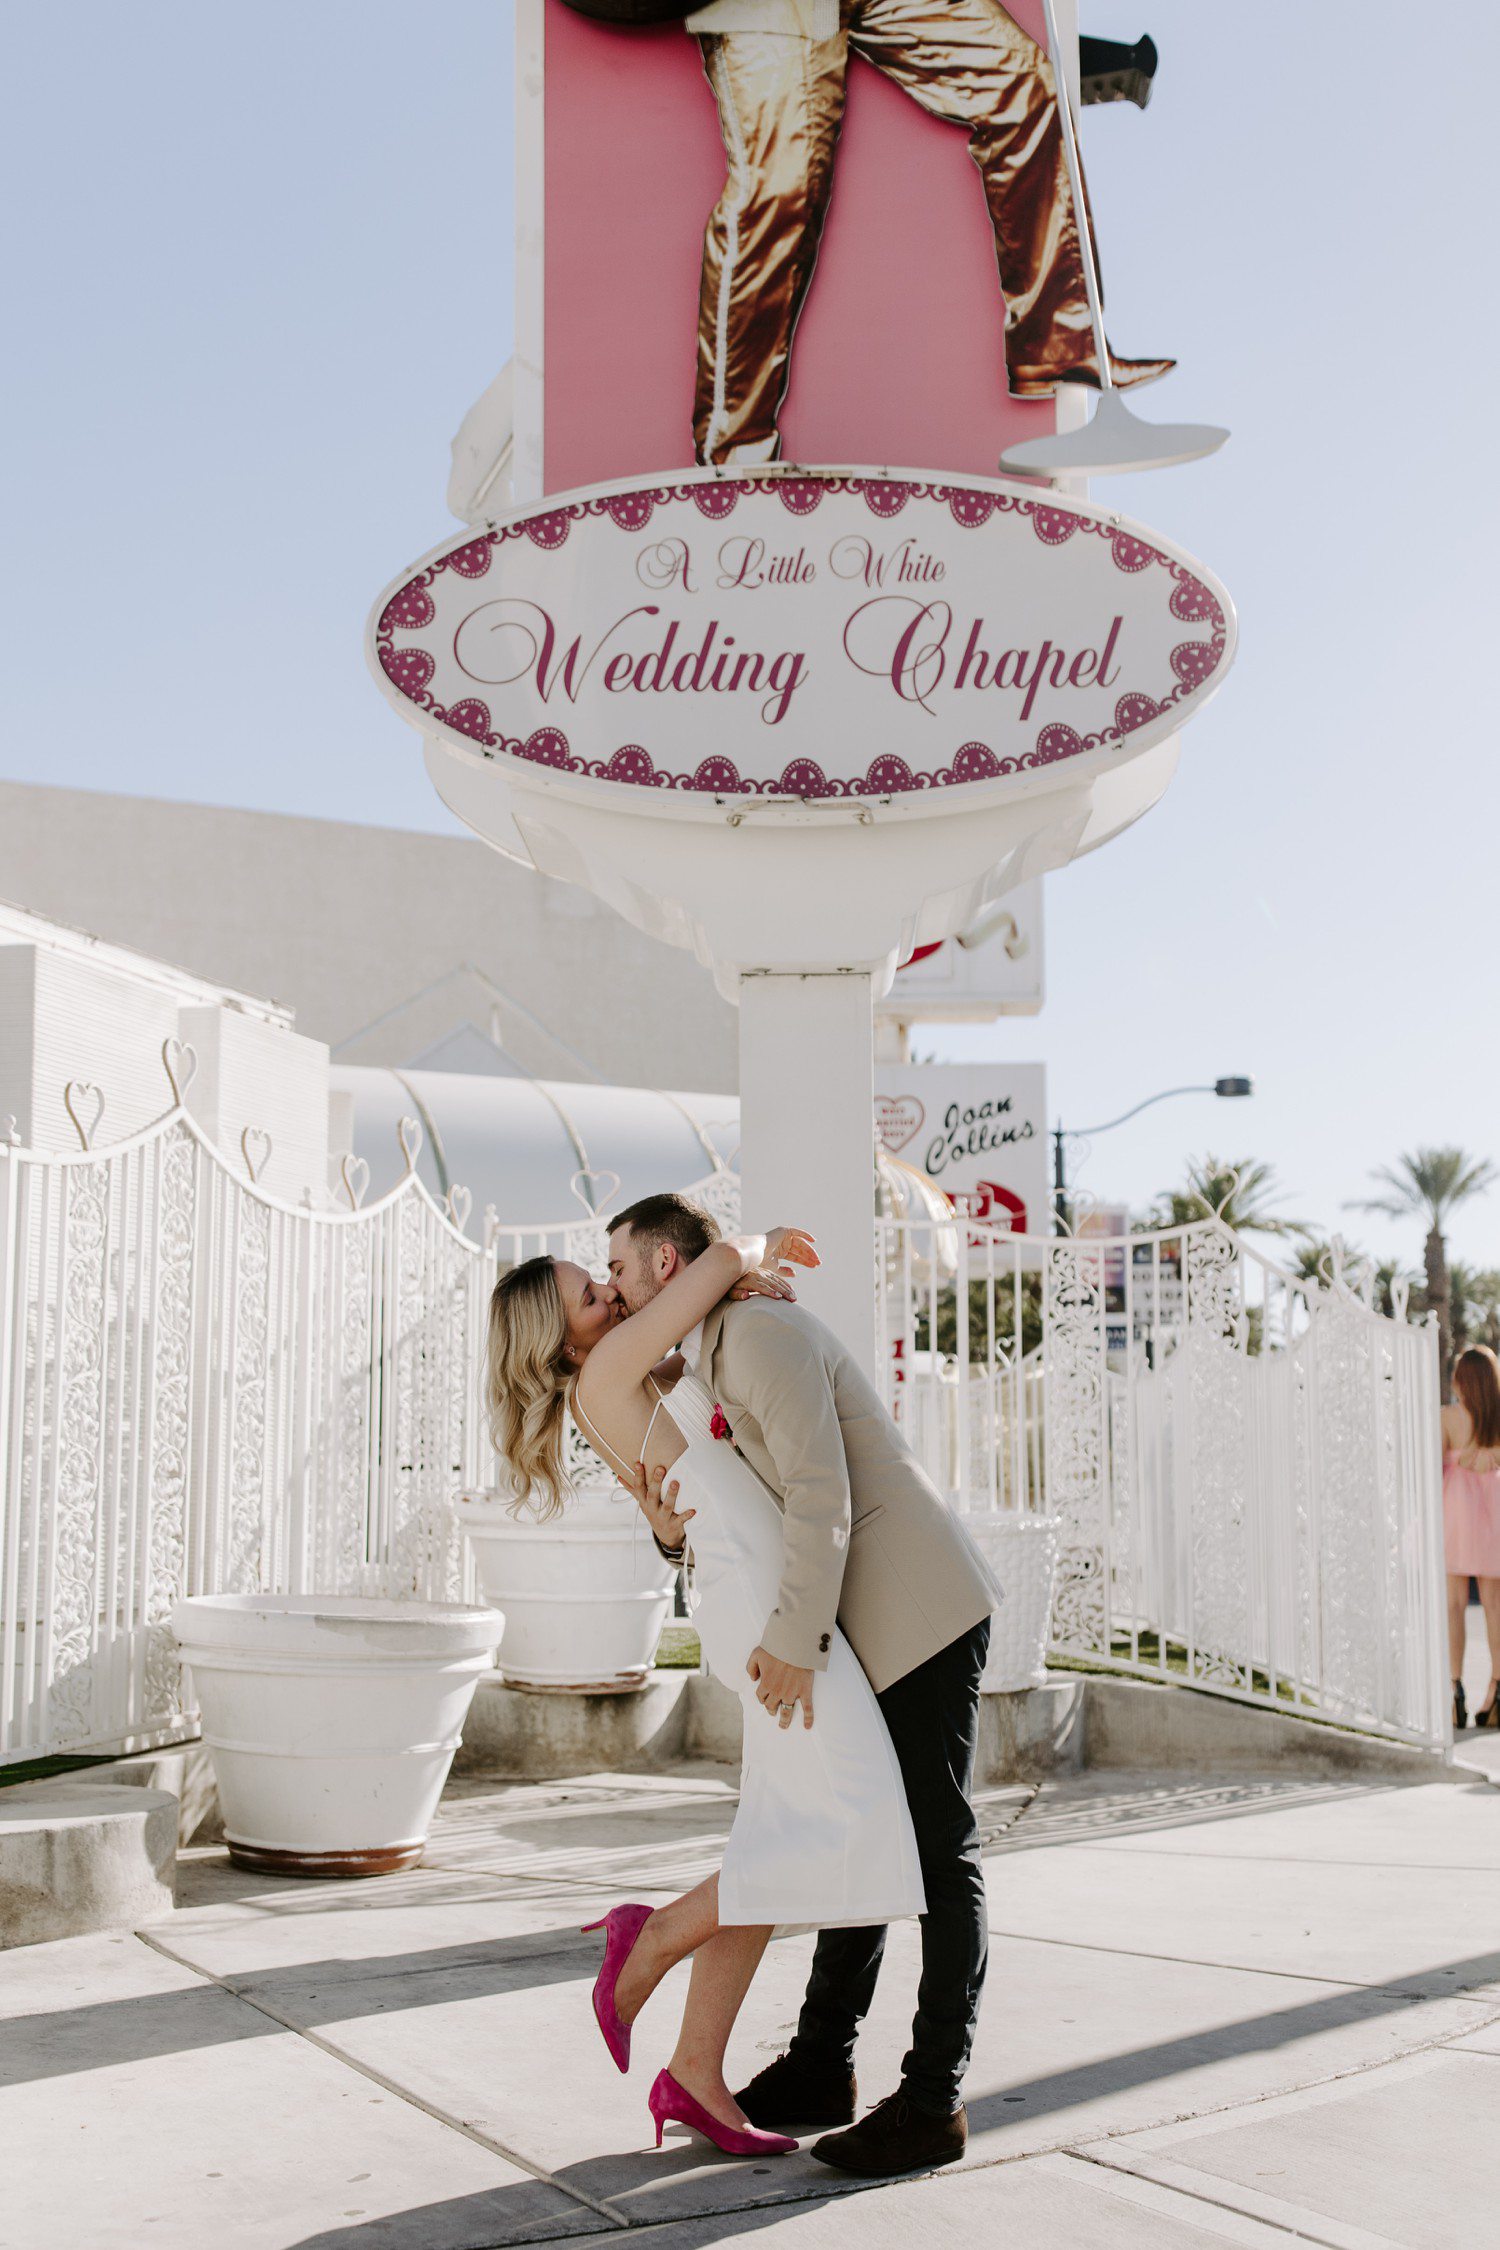 Couple kissing during elopement photos at A Little White Chapel.